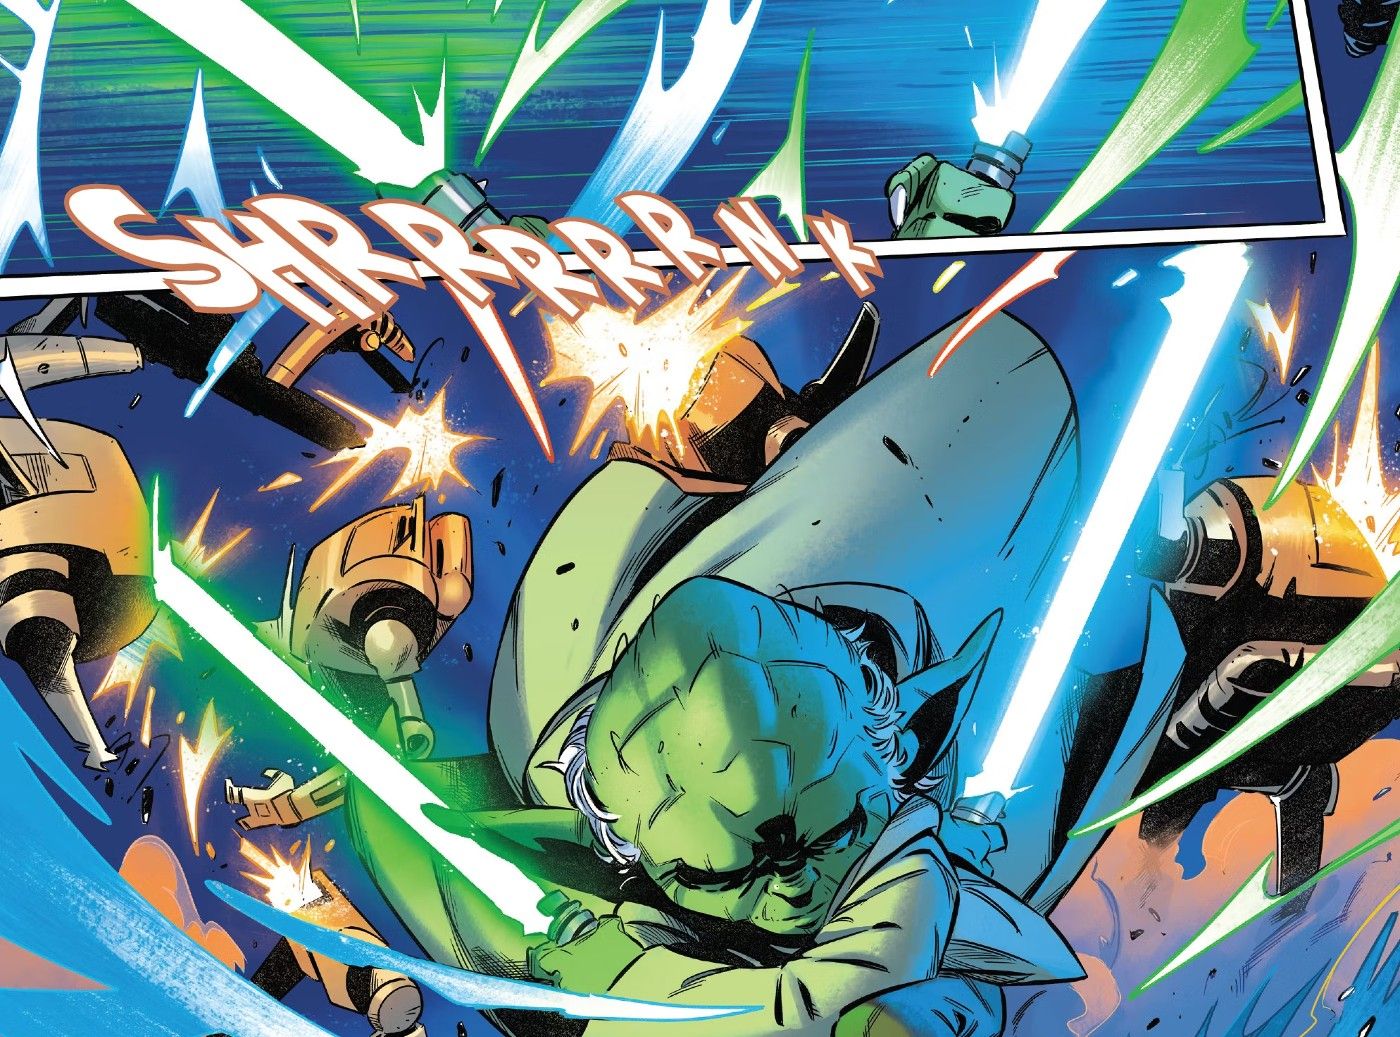 Yoda Dual-Wielding Lightsabers Proves He Should Always Have Used Two